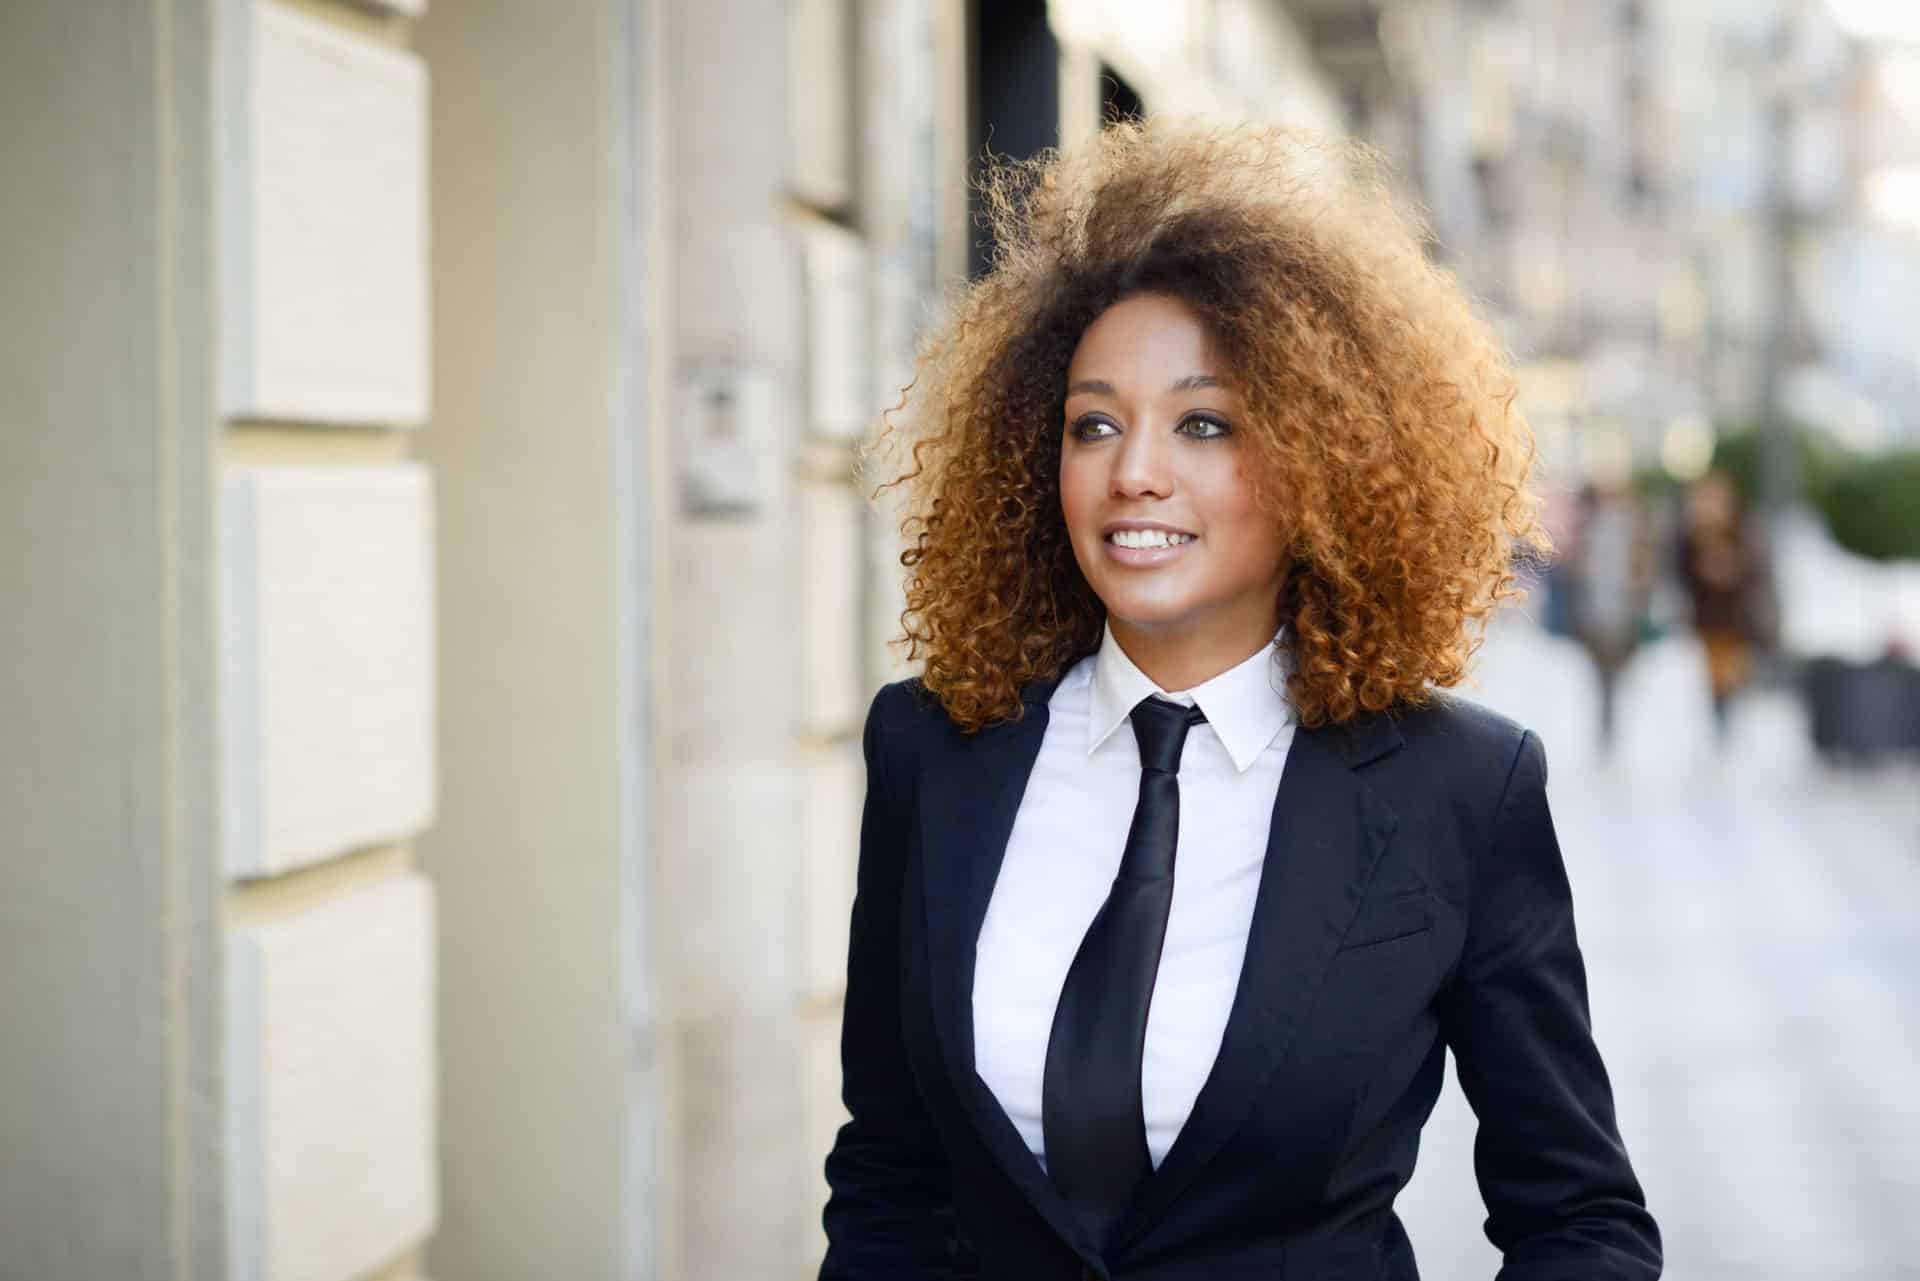 Passed Over for a Job Due to Your Hair? NY Law Calls It Discrimination